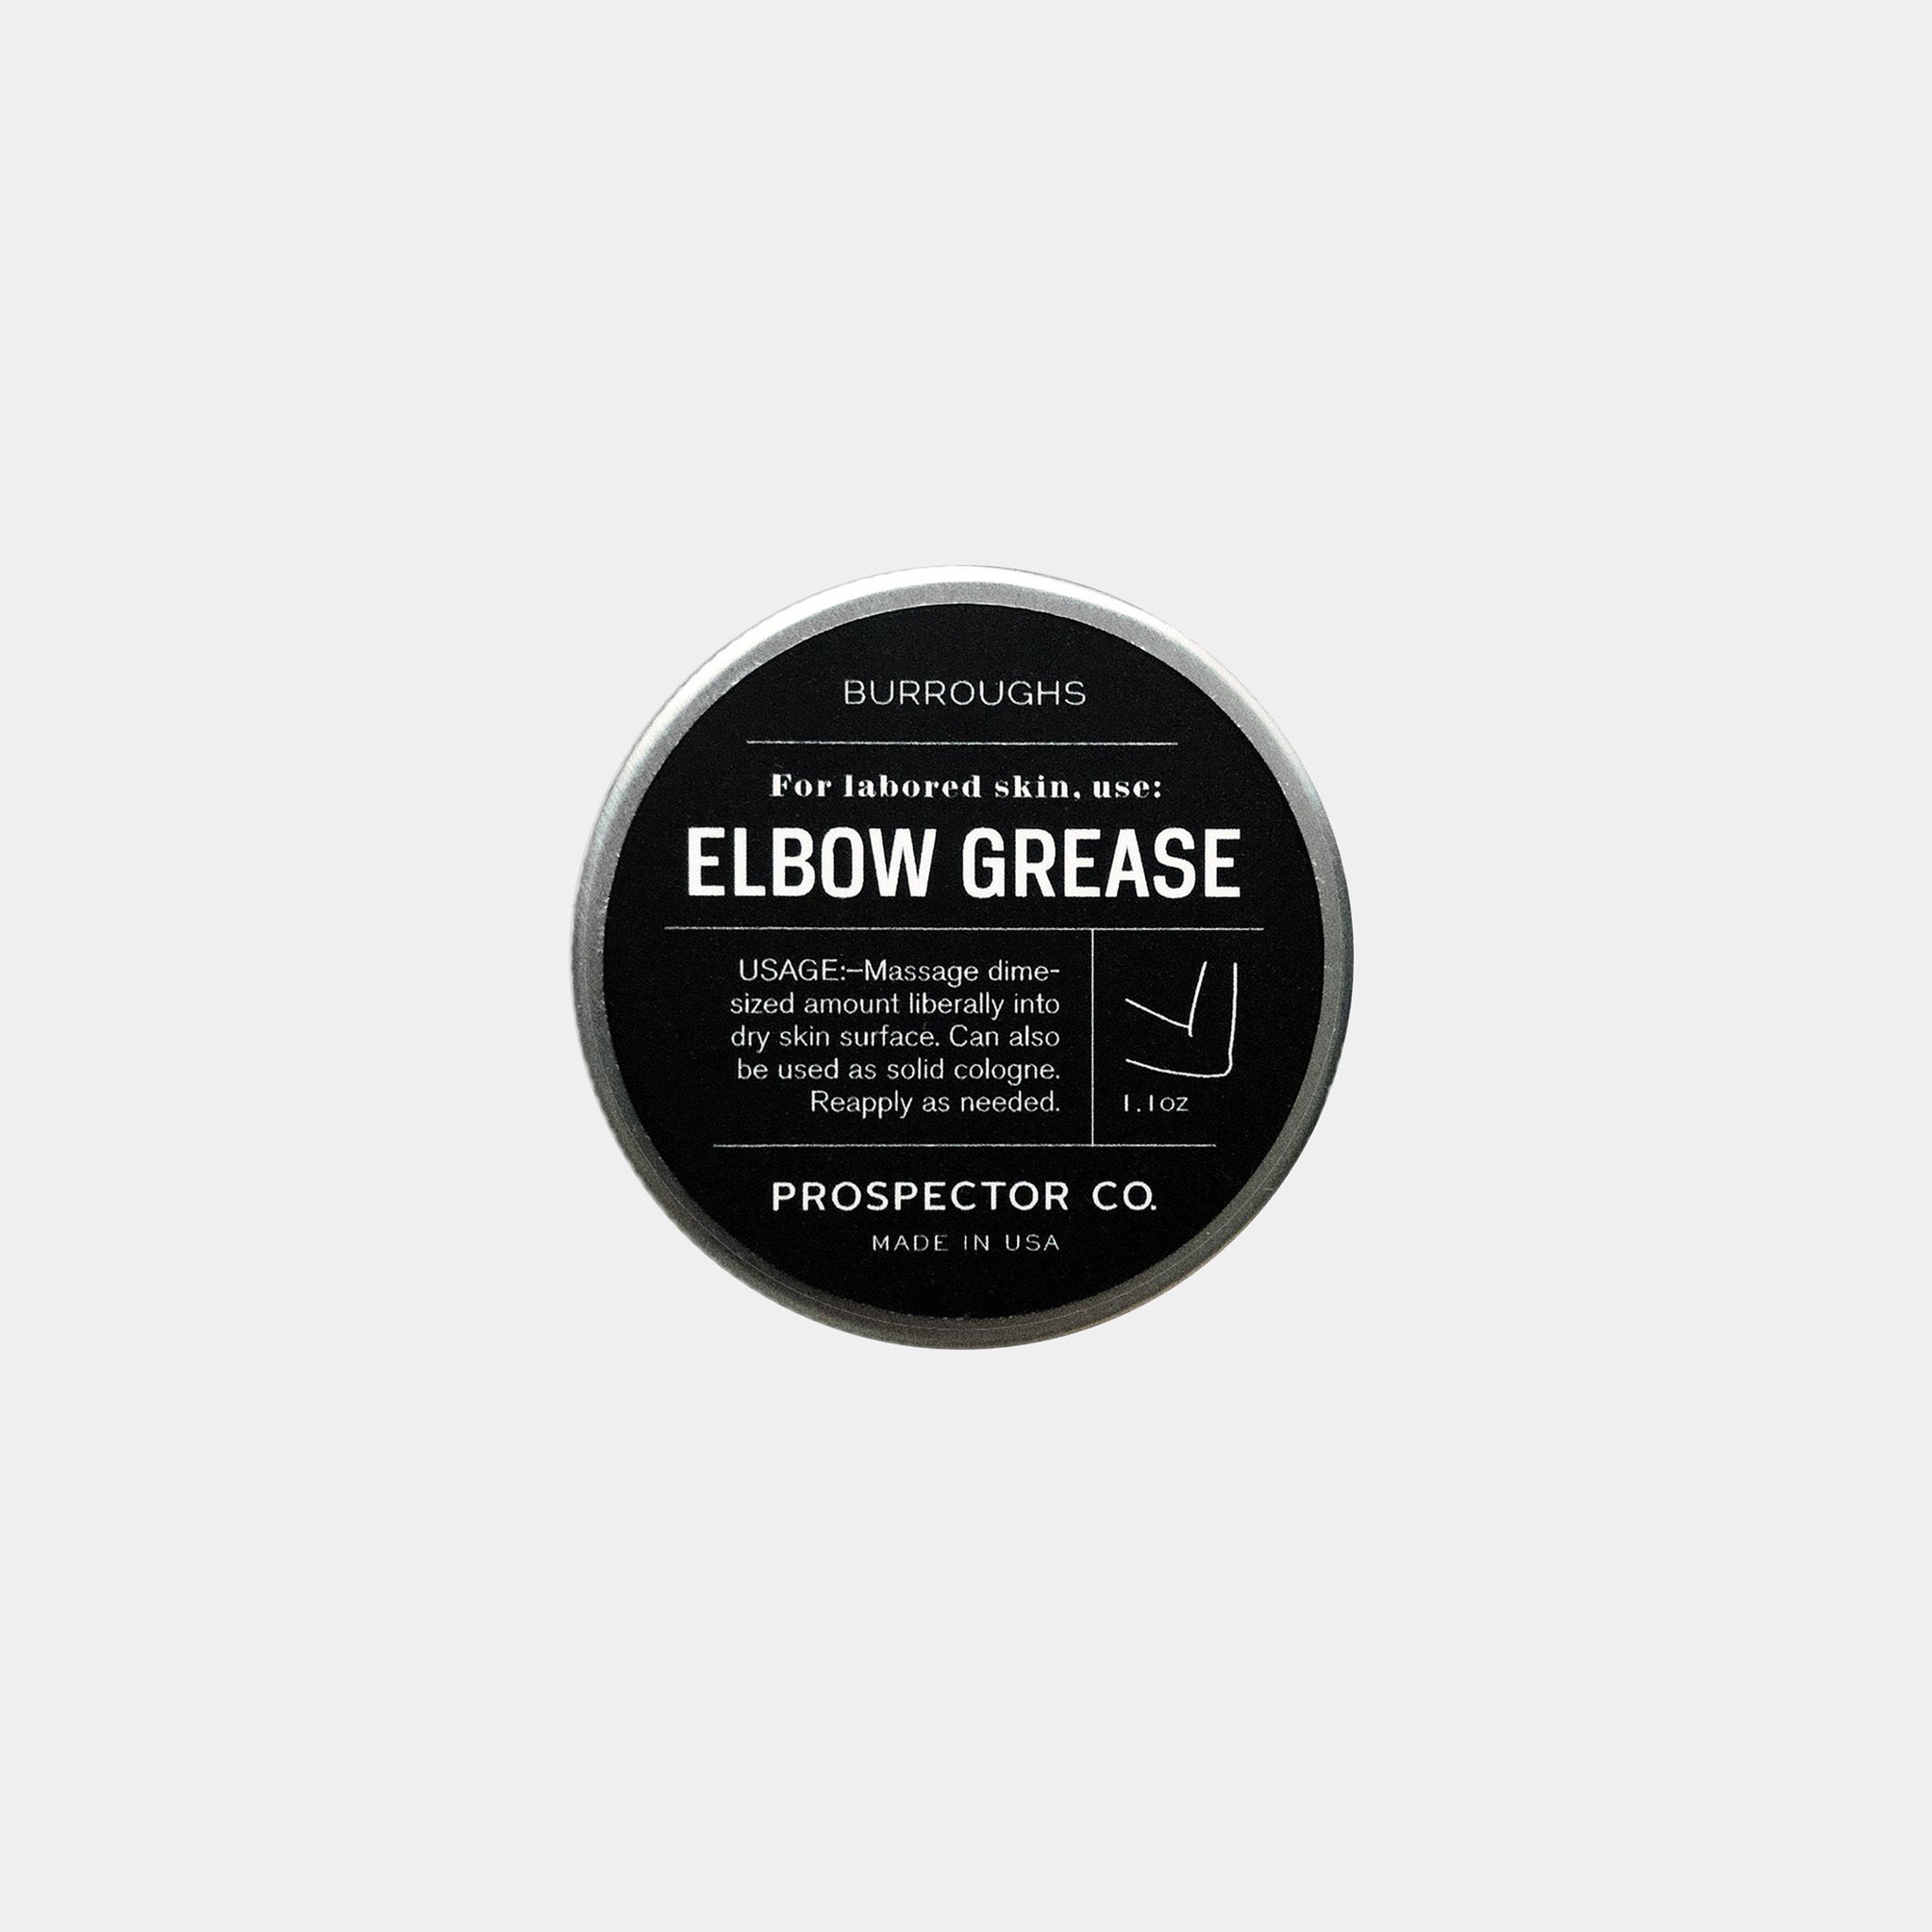 Burroughs Elbow Grease